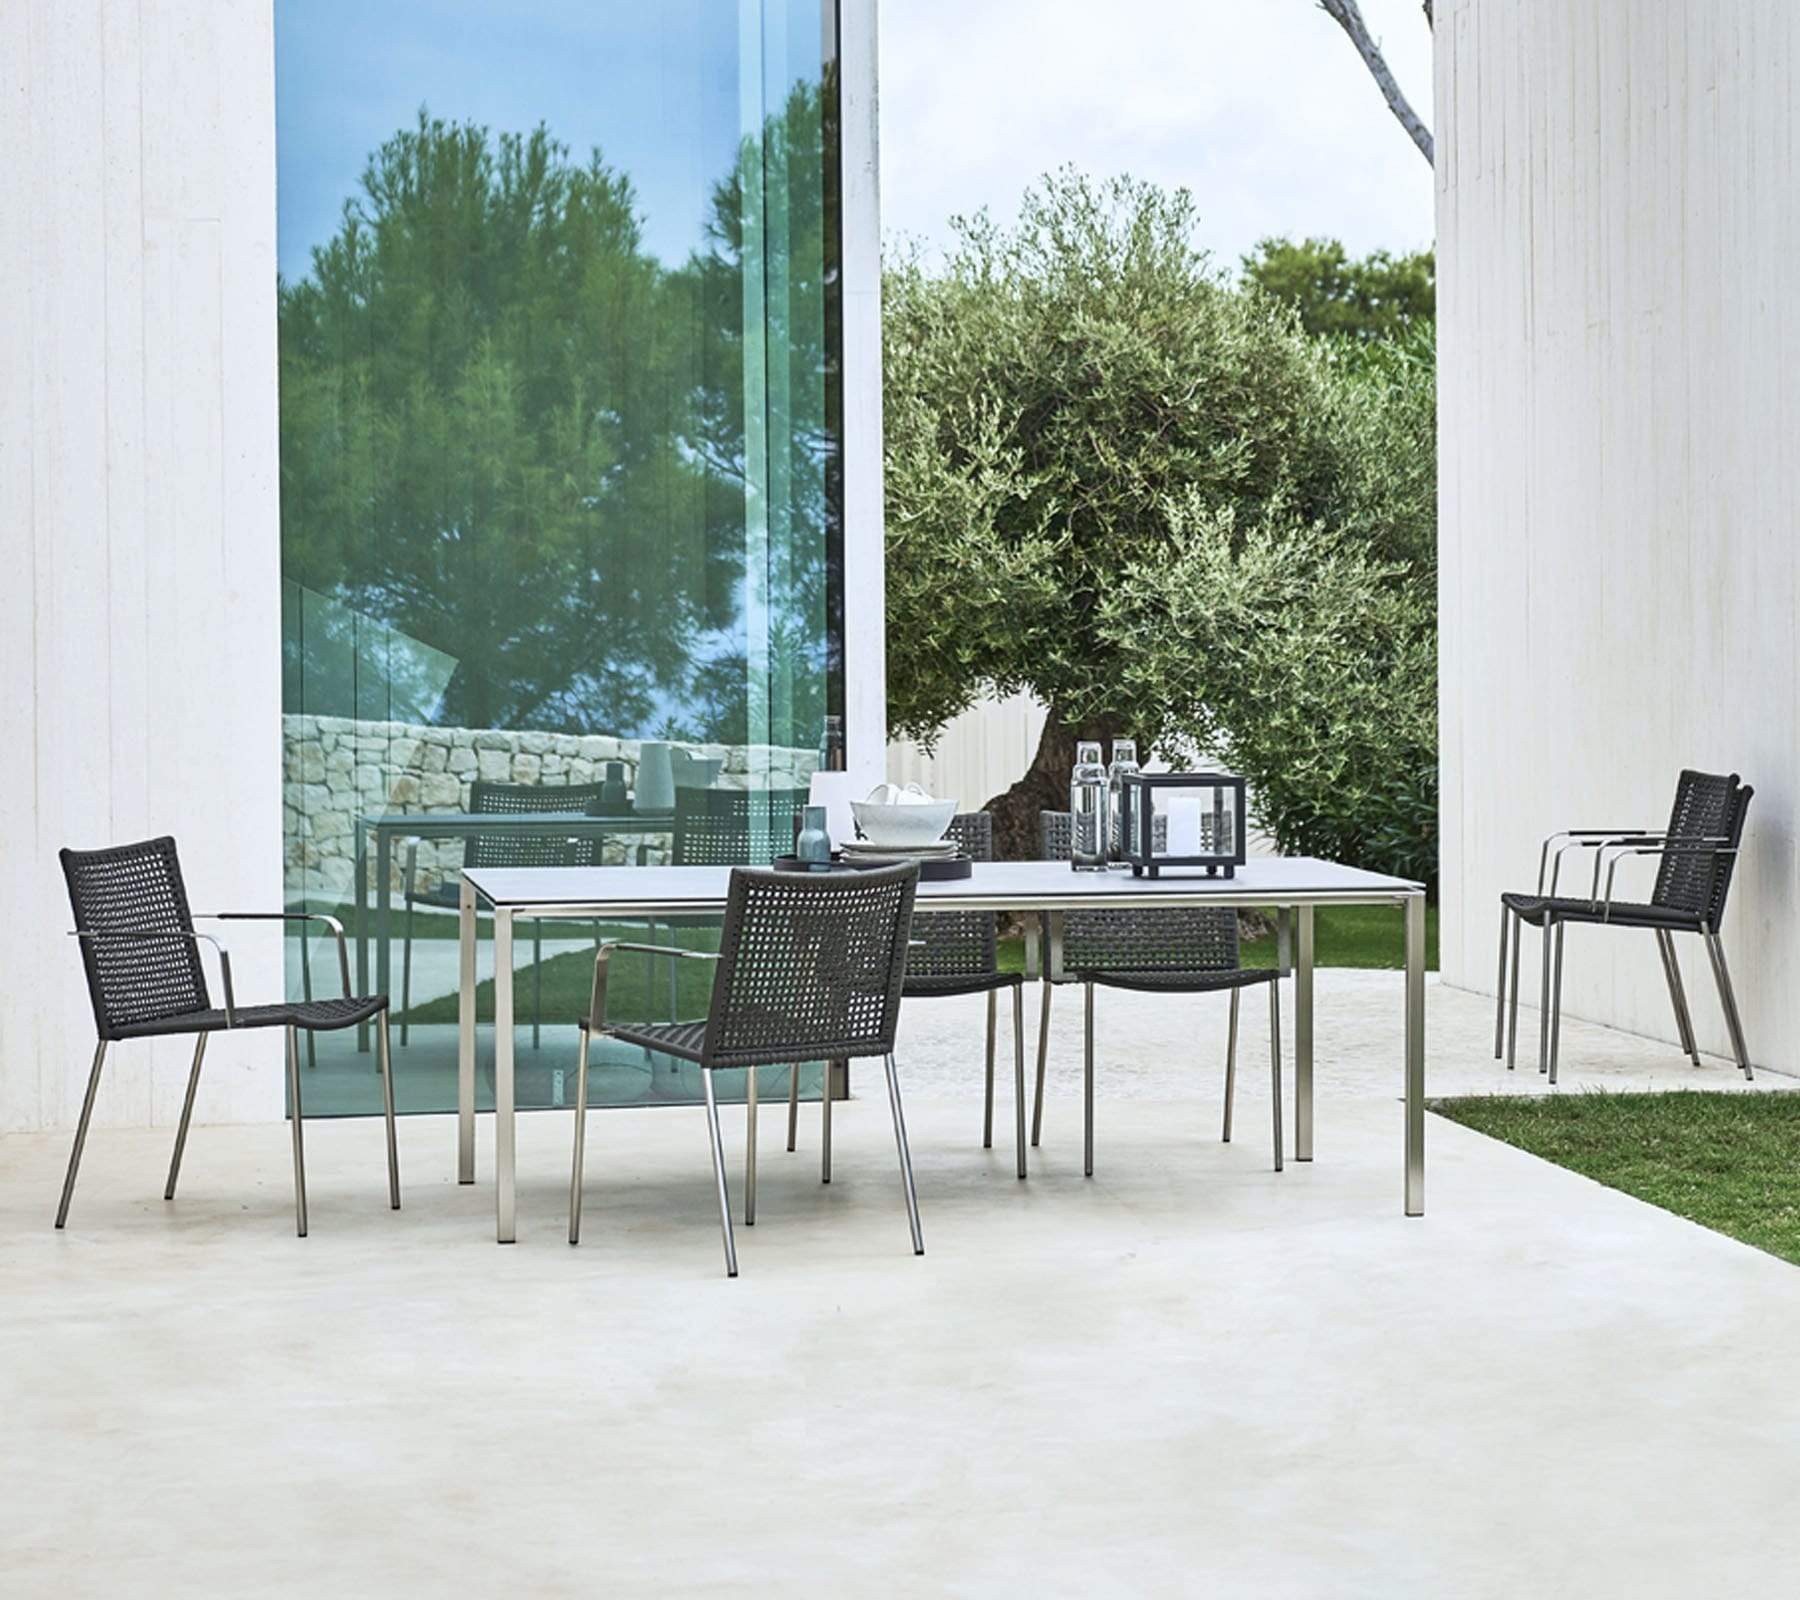  Boxhill's Straw black armchair stainless steel frame with light grey outdoor dining table placed in patio